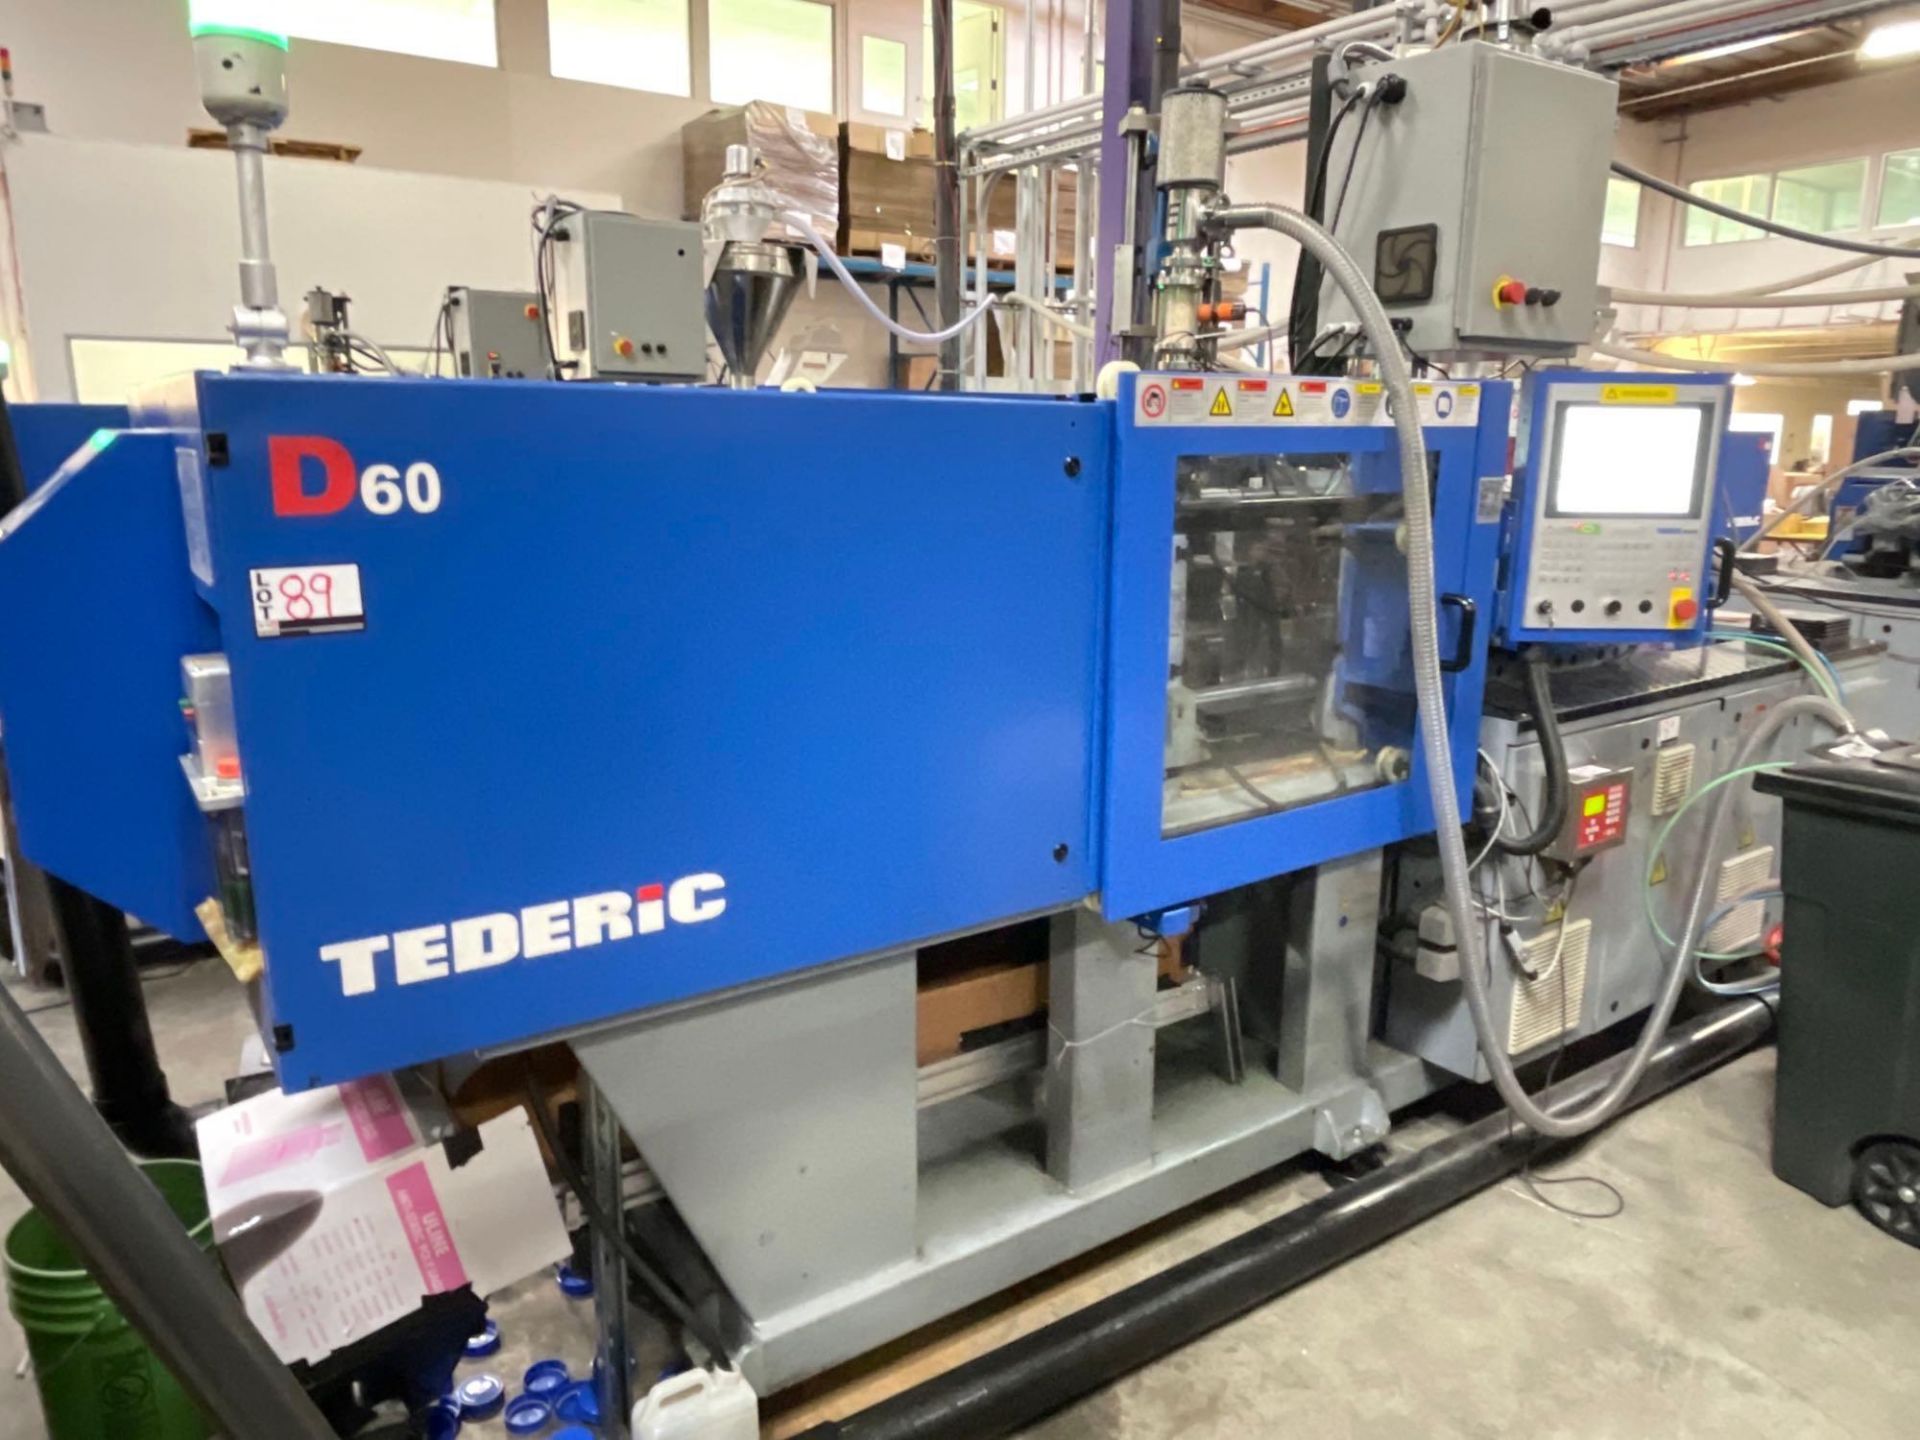 66 Ton Tederic D60 Plastic Injection Molder, Keba 12000 Control, s/n T3008-0200, New 2018 - Image 6 of 17